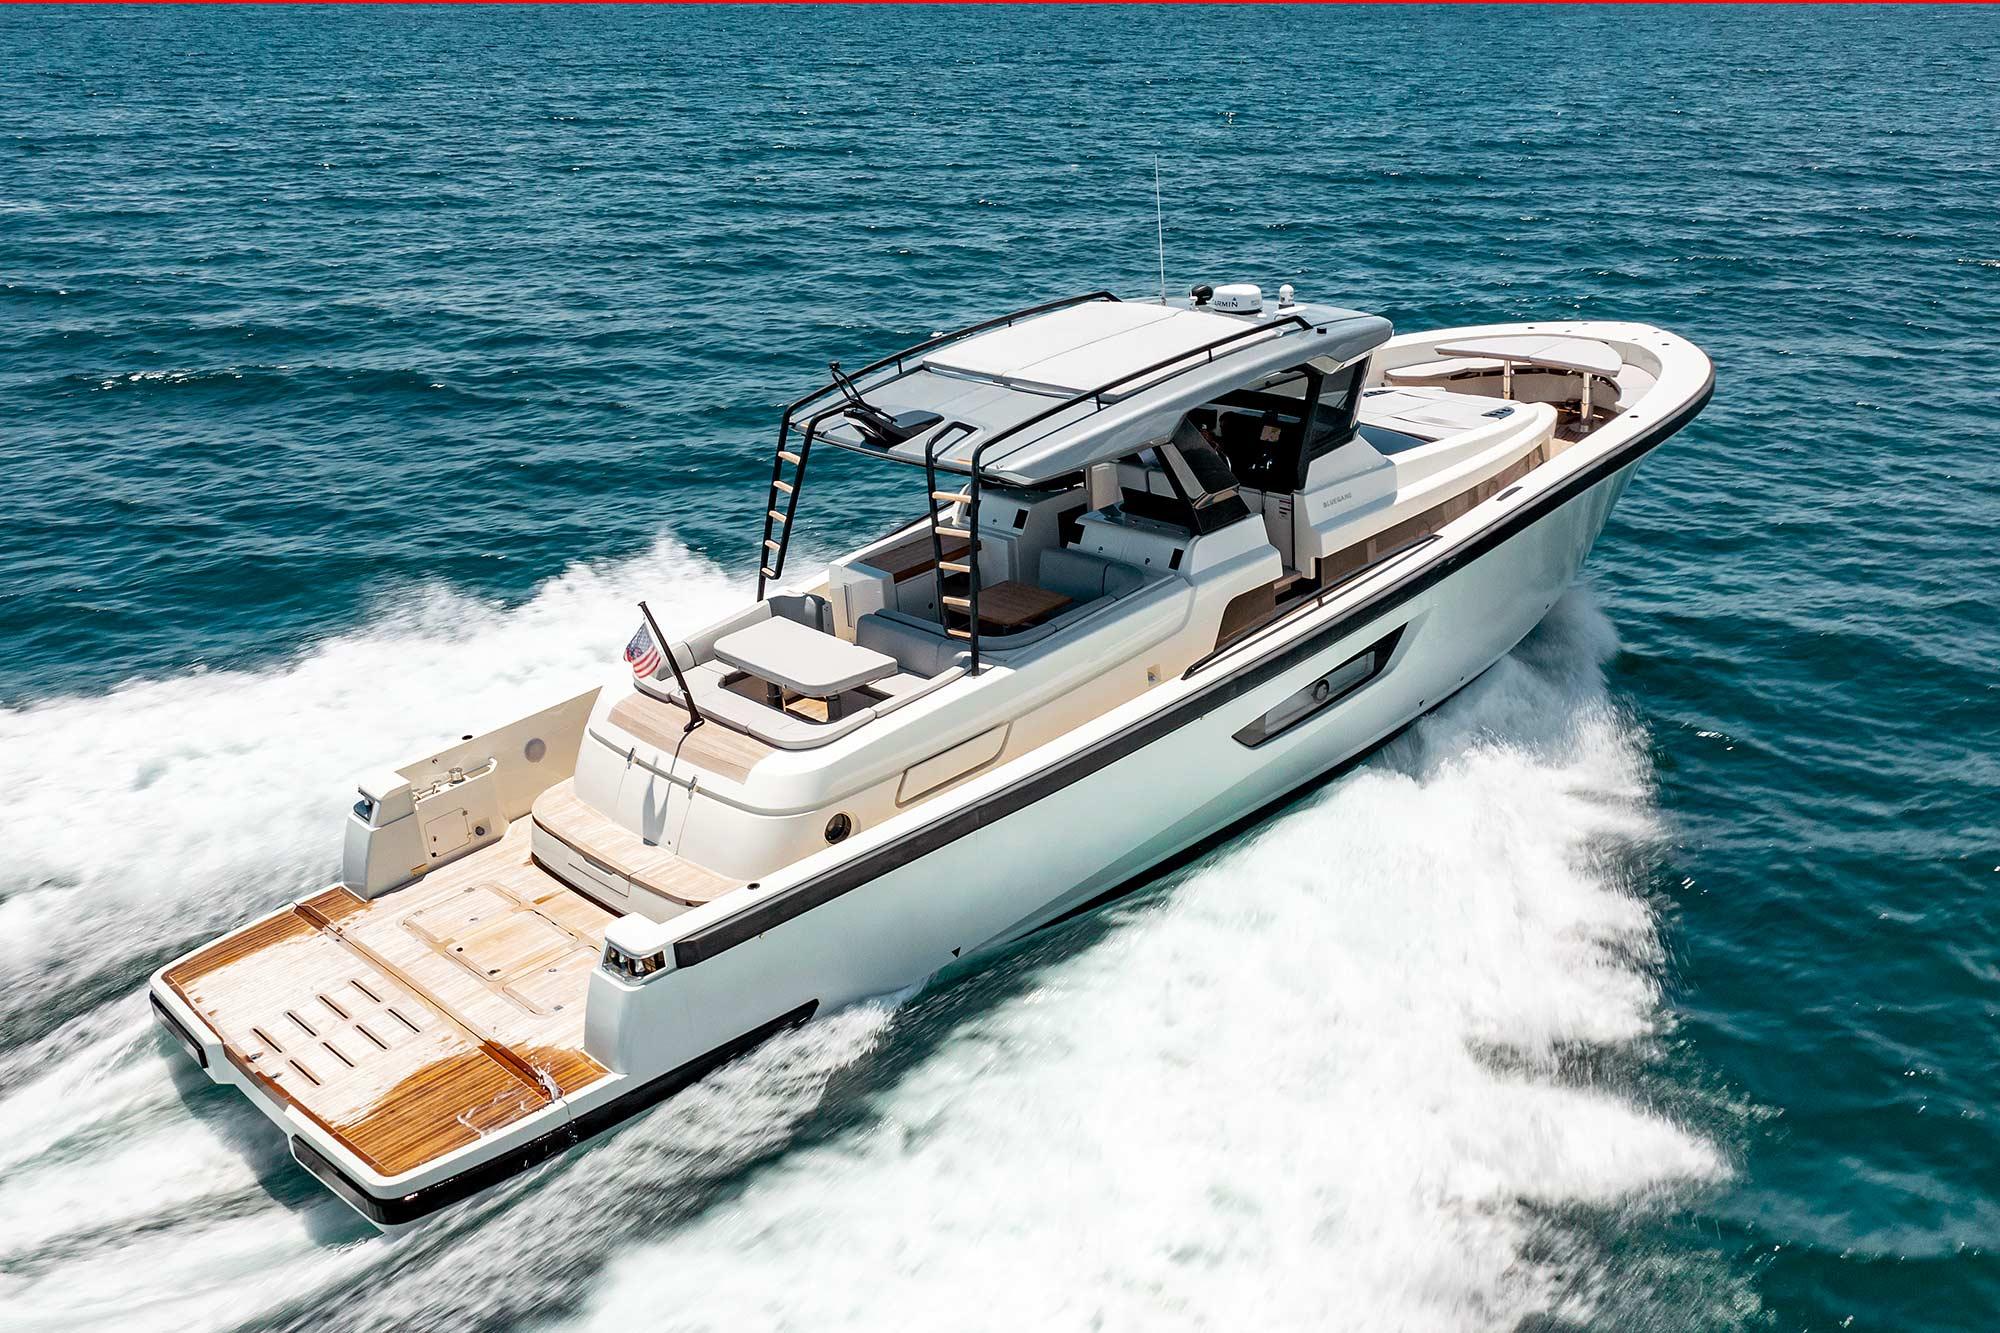 2019 Bluegame 62 ft Yacht For Sale | Allied Marine